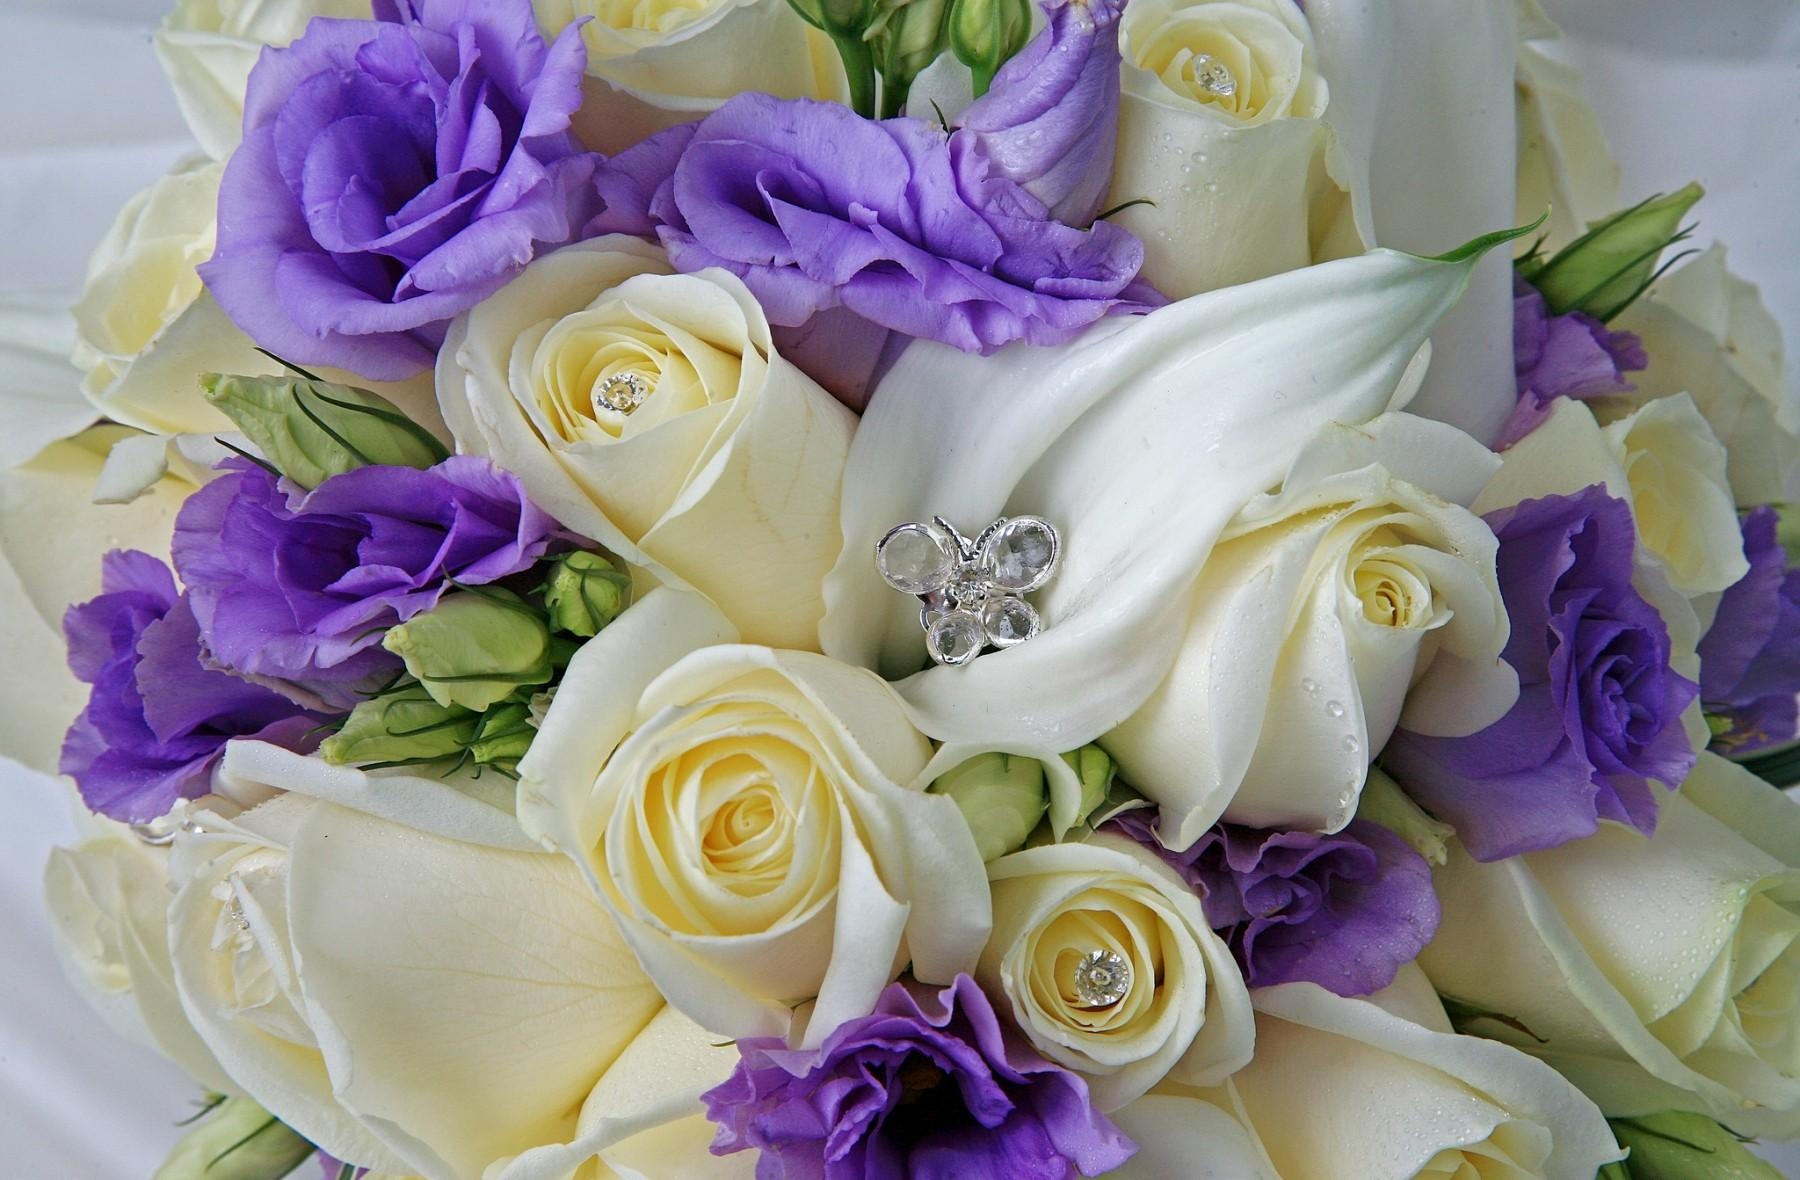 drops, flowers, roses, decorations, bouquet, lisianthus russell, lisiantus russell